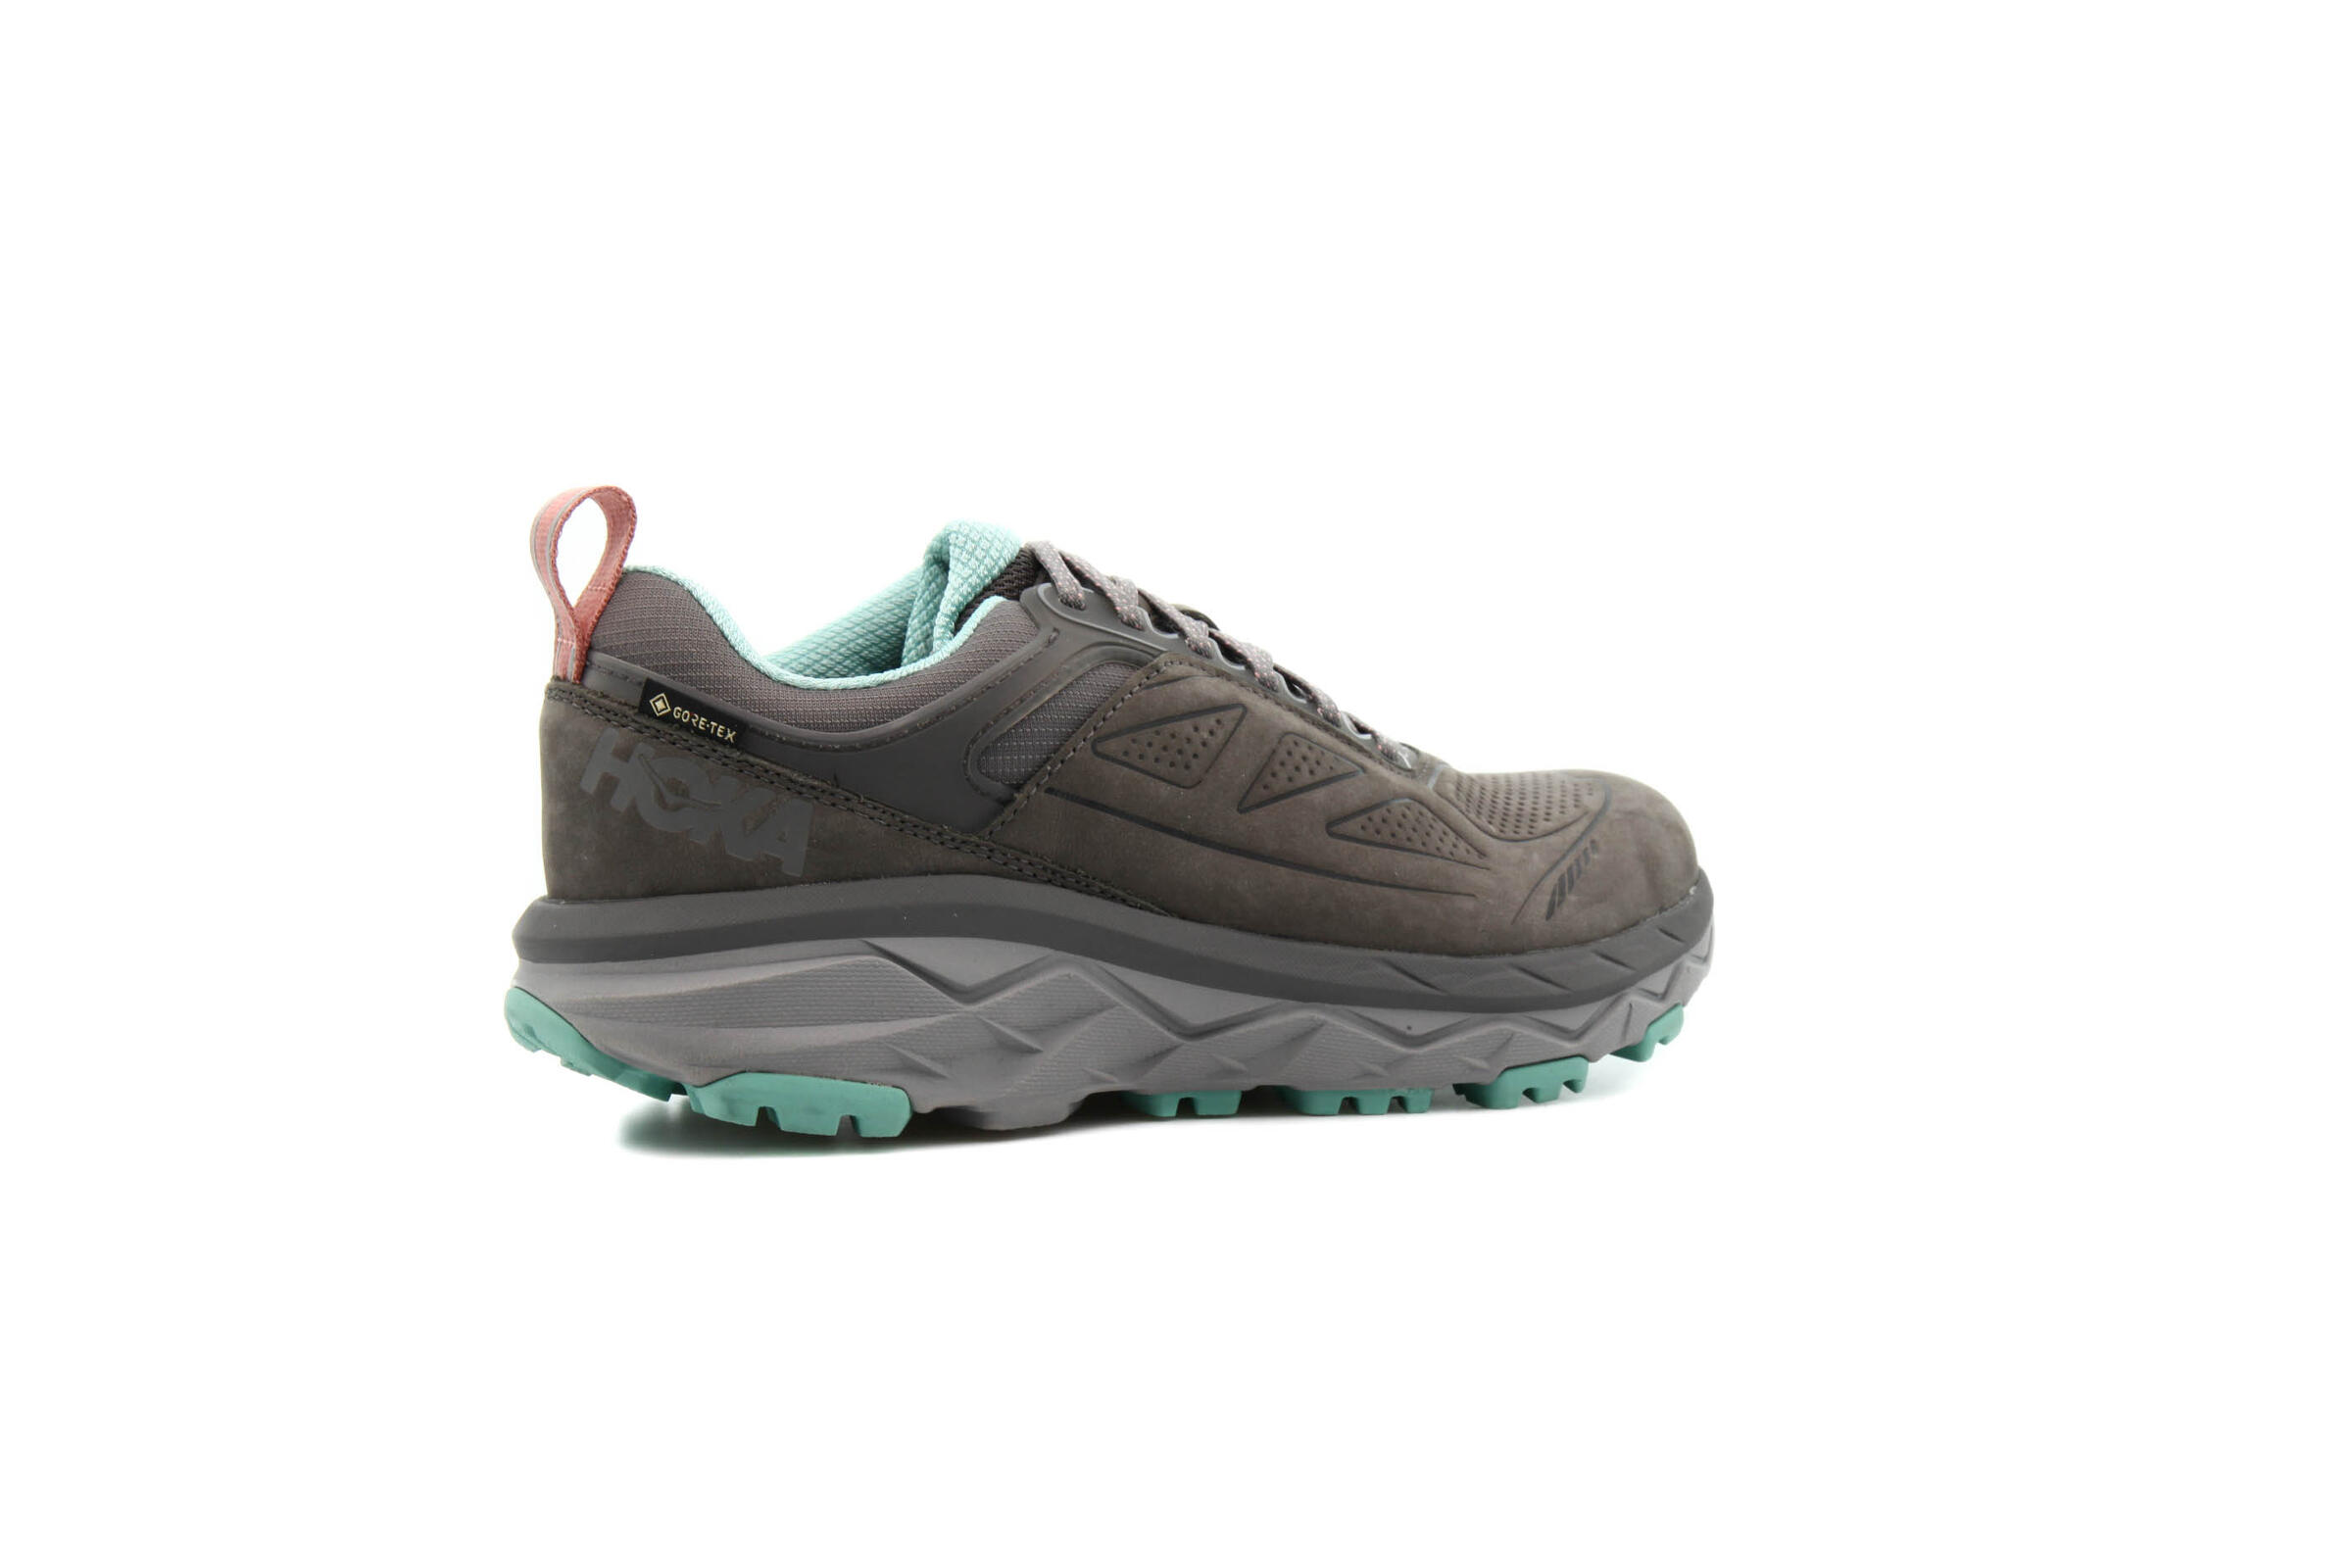 Hoka One One WMNS CHALLANGER LOW GORE-TEX "CHARCOAL GRAY"